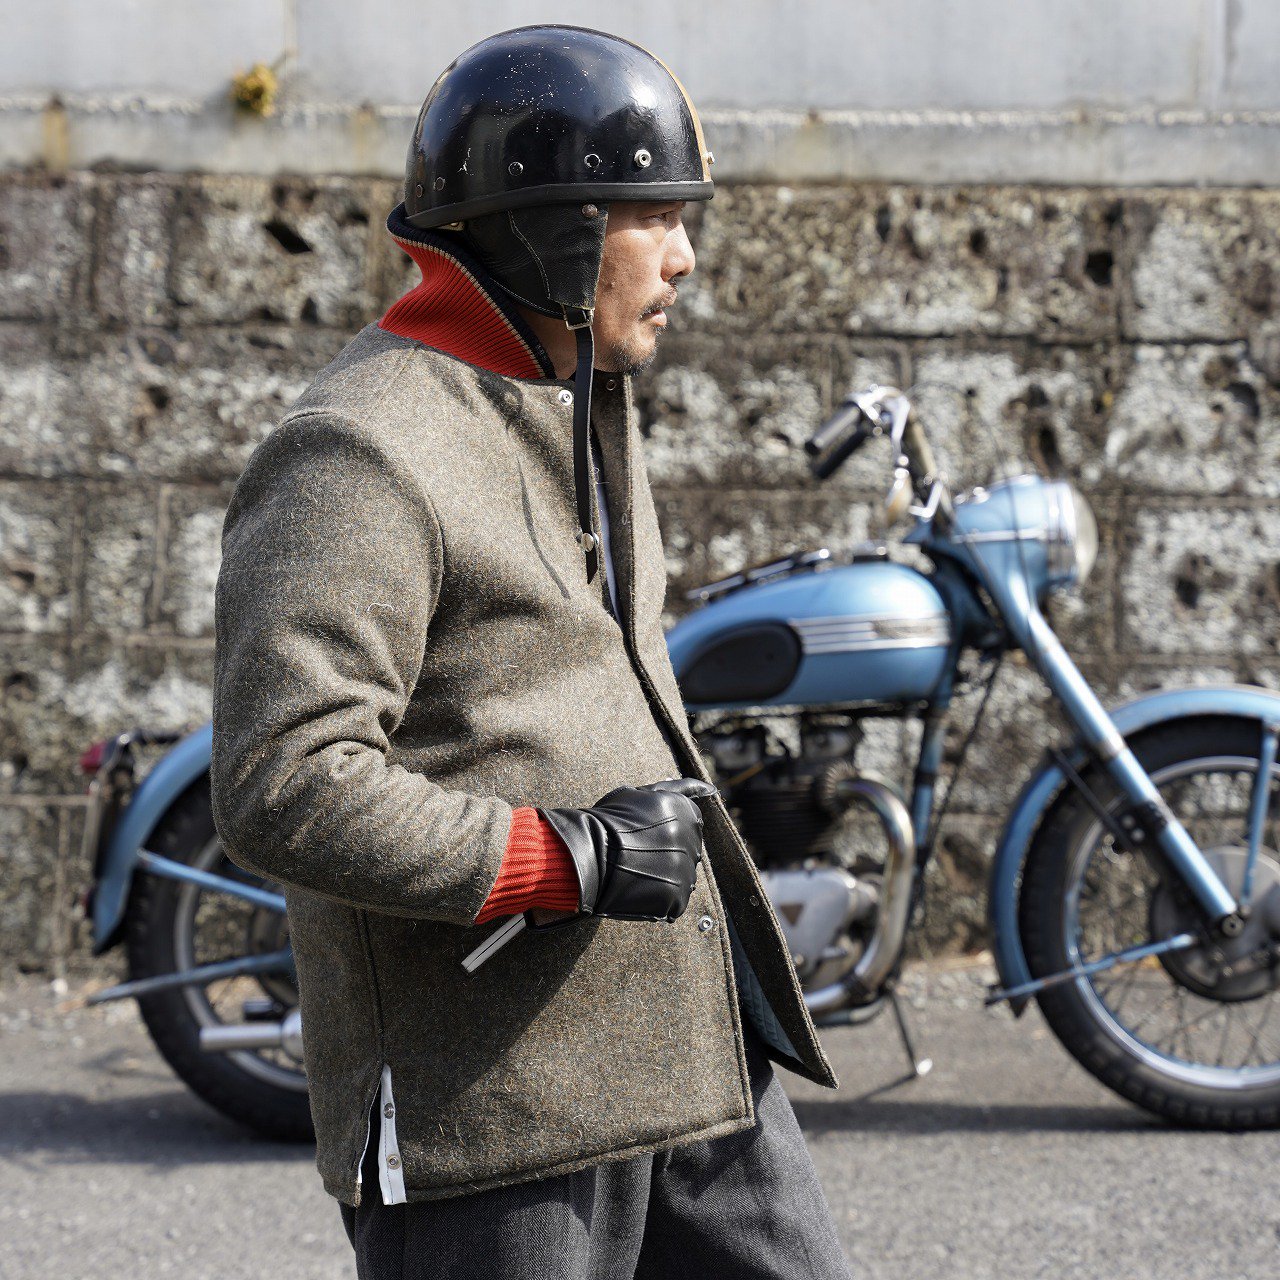 Vintage style Motorcycle knit - The Groovin High & Old Devil Moon